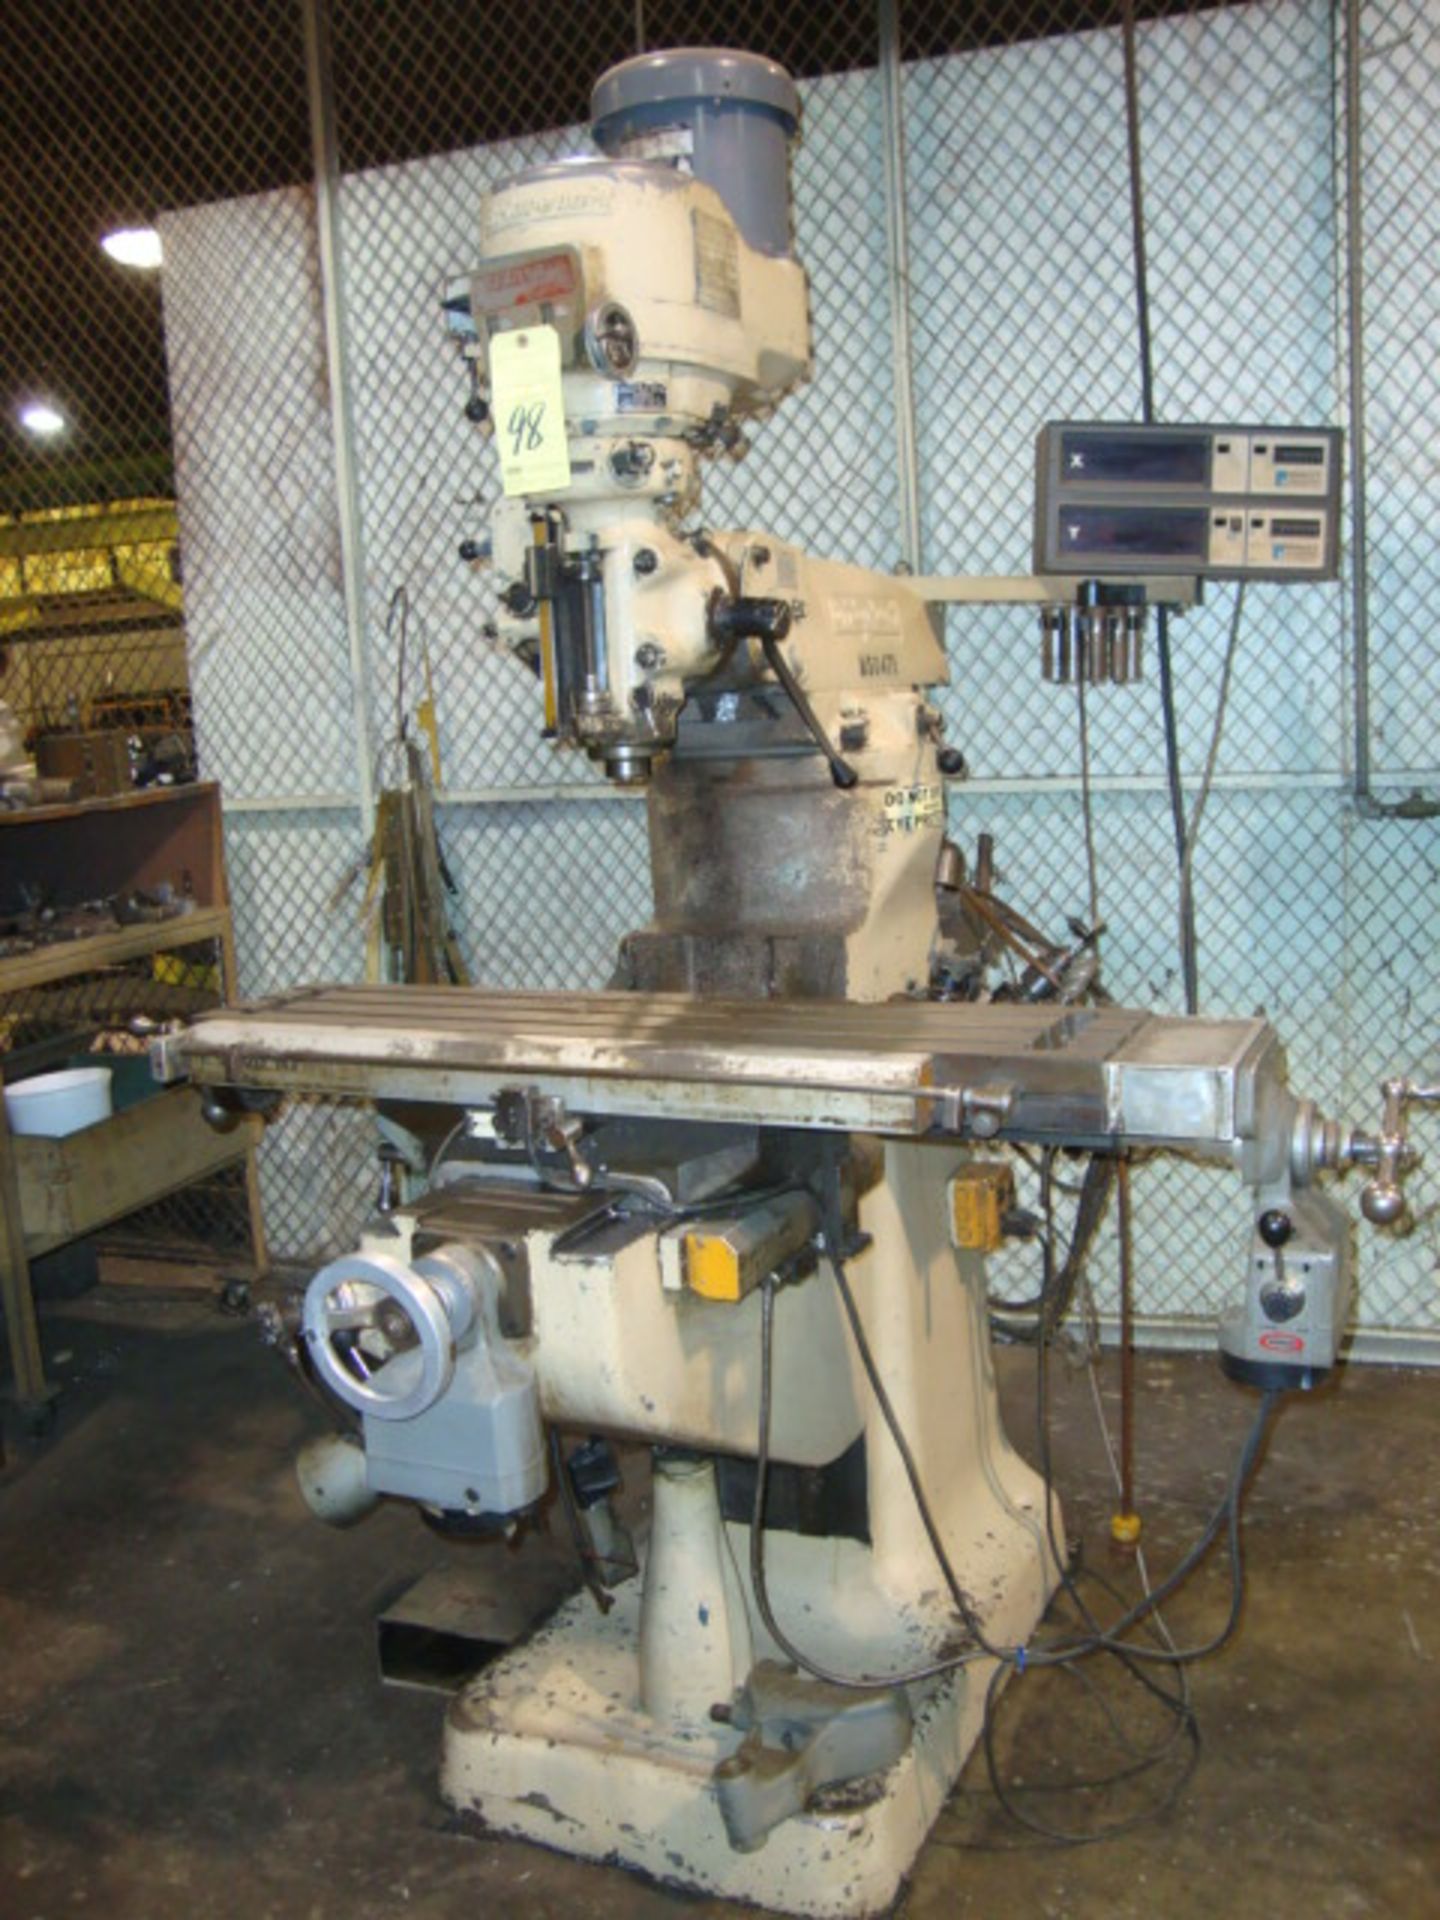 TURRET TYPE VERTICAL MILL, BRIDGEPORT SERIES 1, 9" x 42" table, chrome ways, 2-axis D.R.O.,